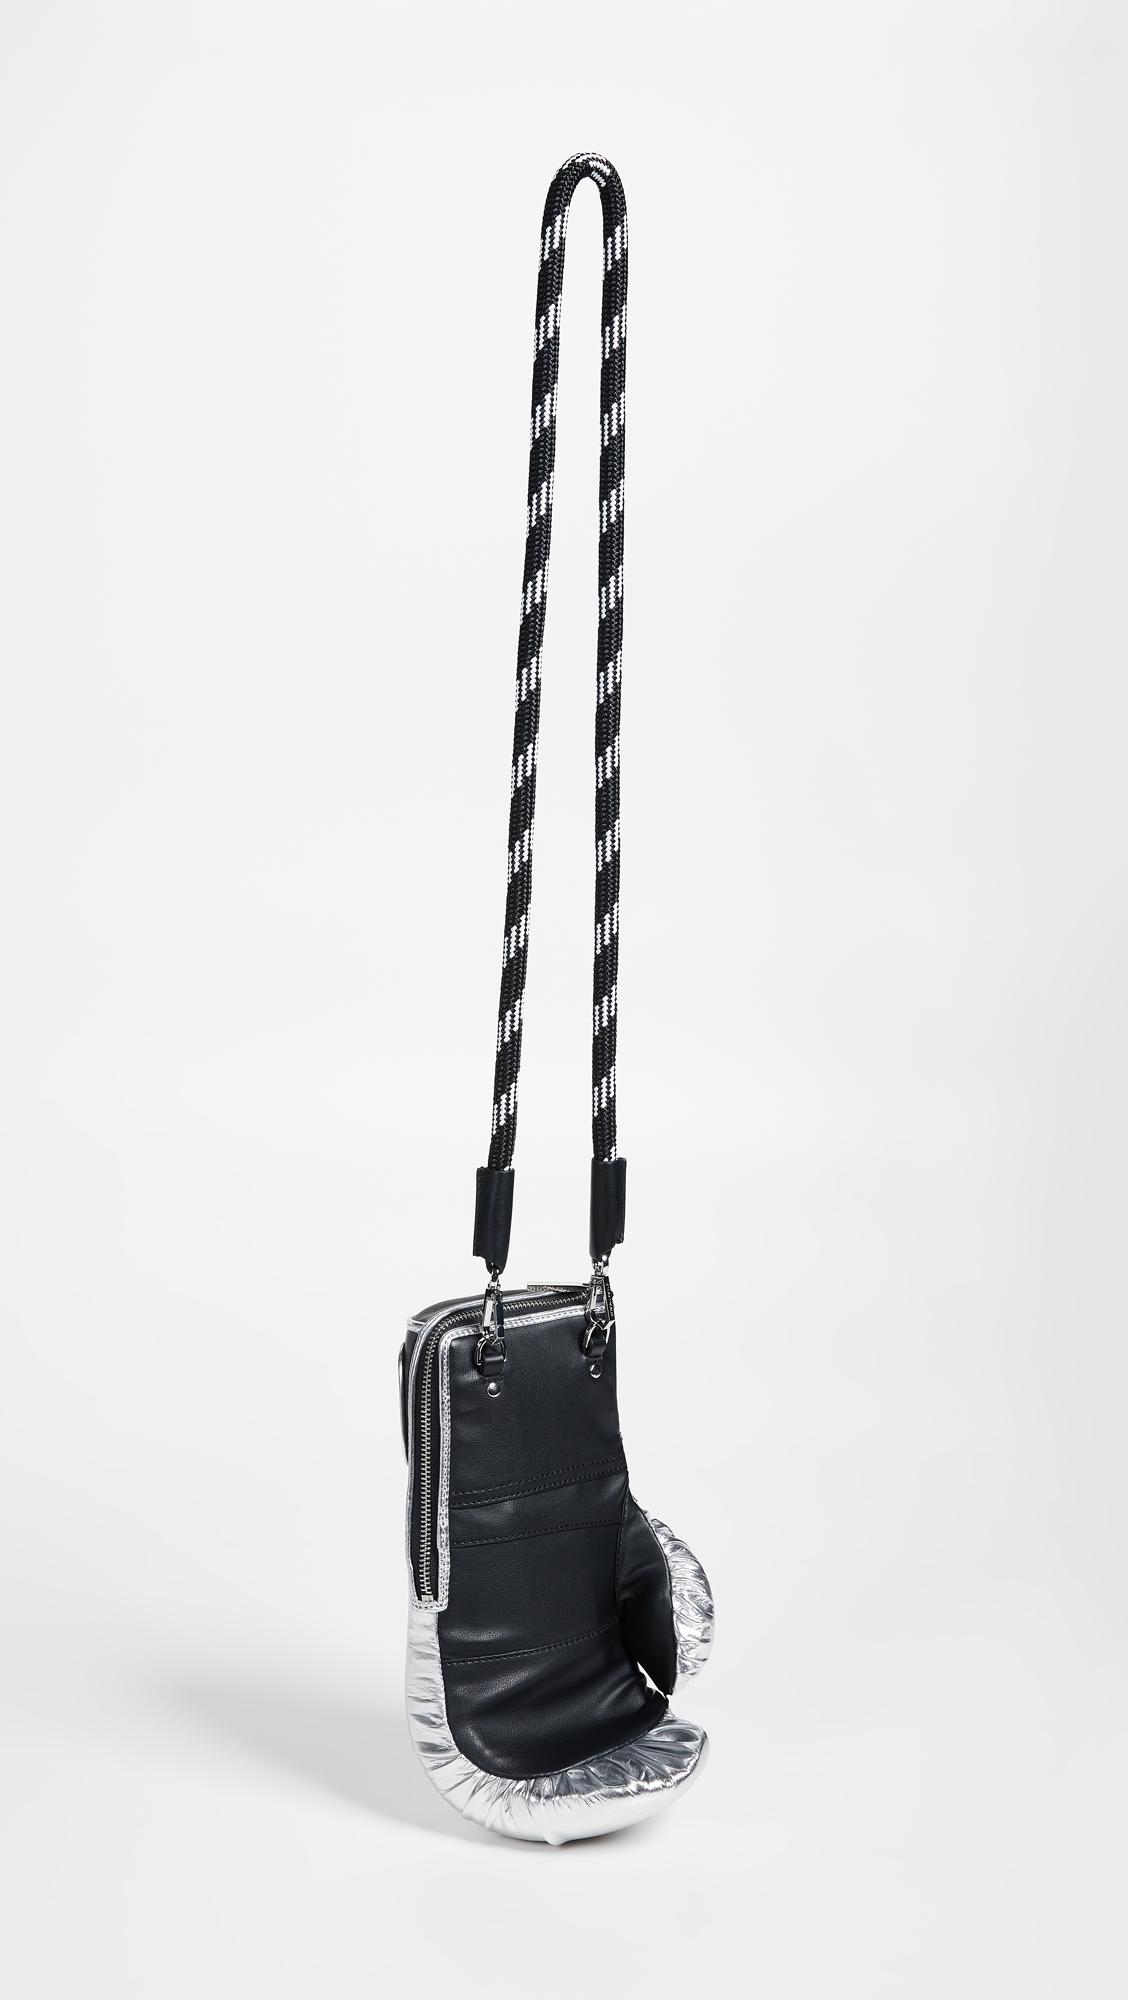 Kendall + Kylie Boxing Glove Cross Body Bag in Black | Lyst